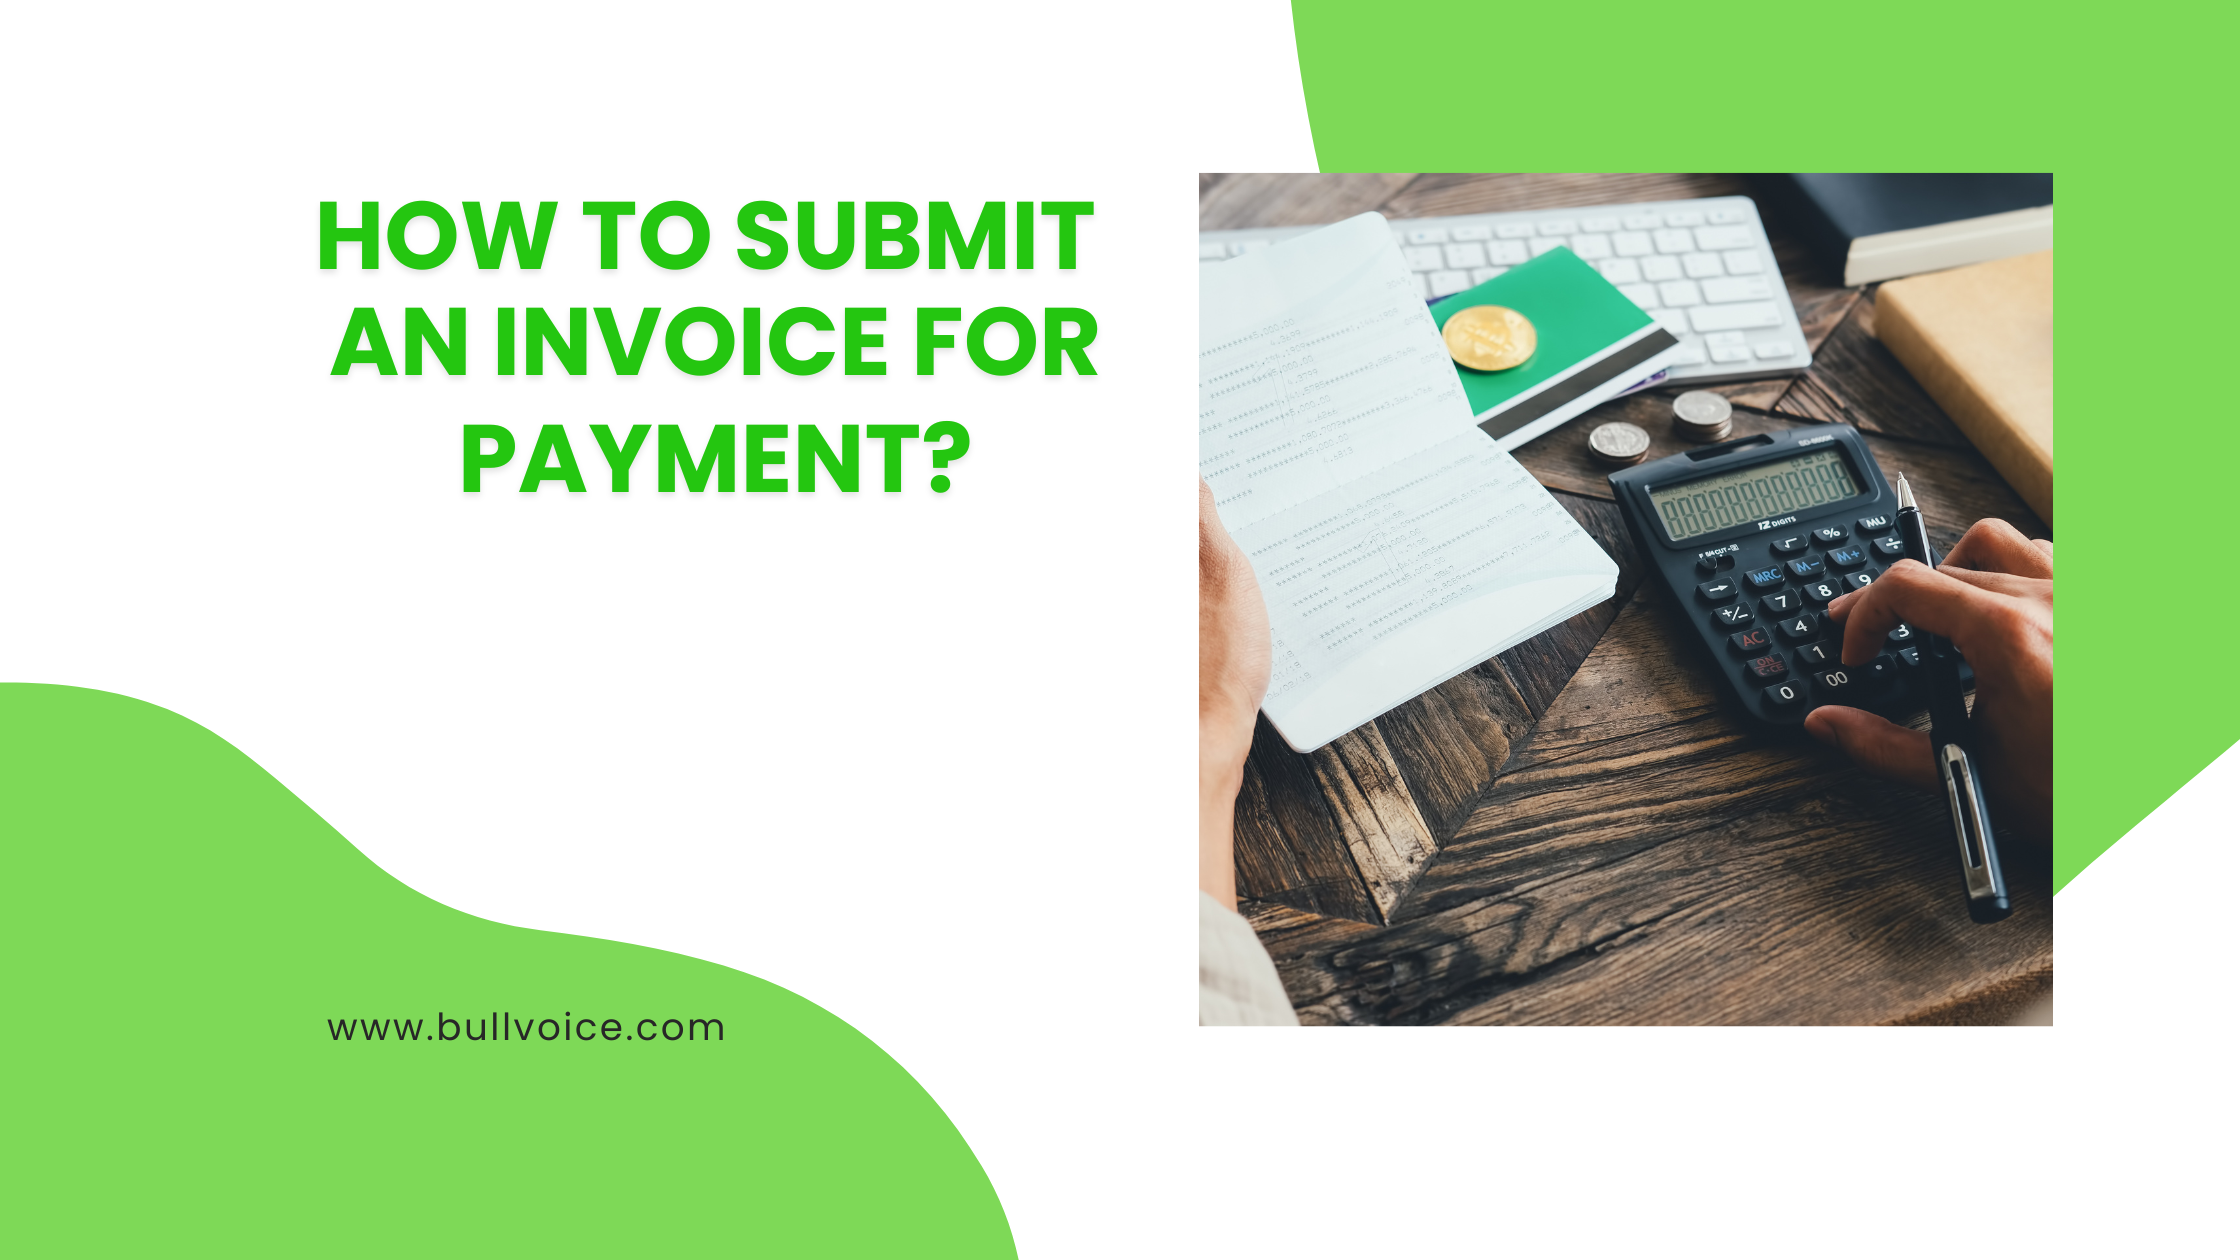 How to submit an invoice for payment